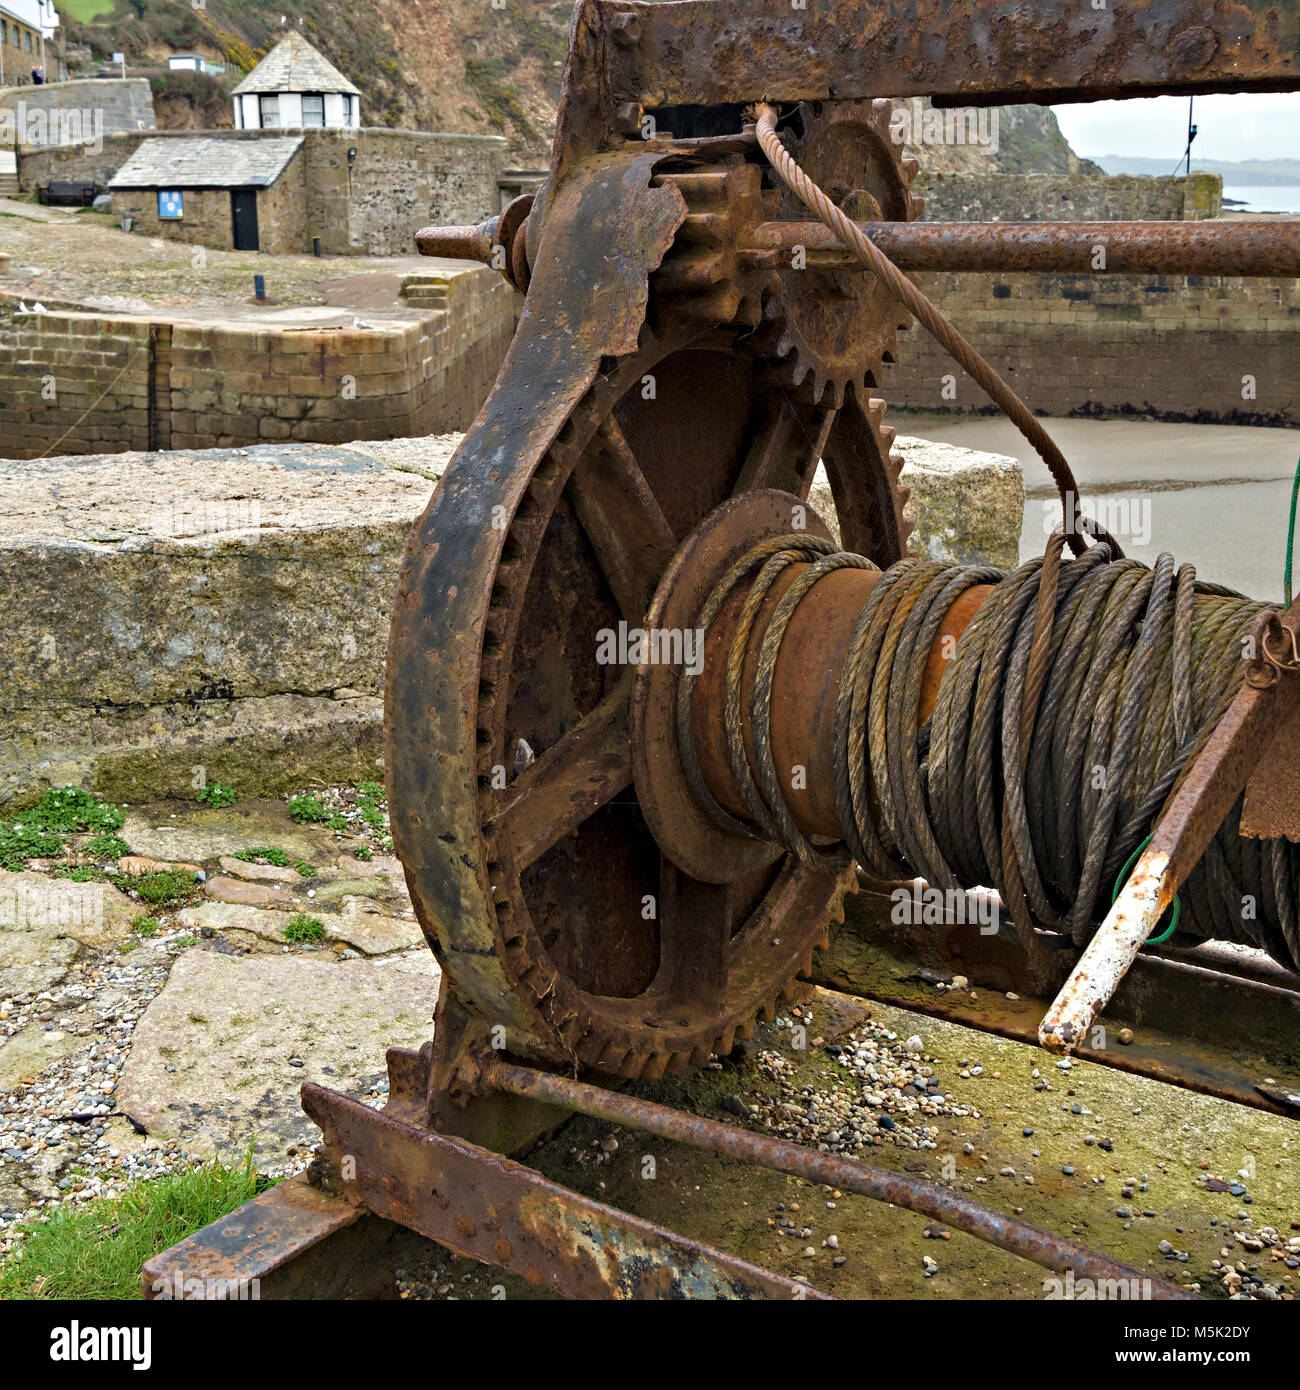 Old boat winch with rusty gear wheels and cogs, and steel cable, Charlestown Harbour slipway, Cornwall, England, UK Stock Photo